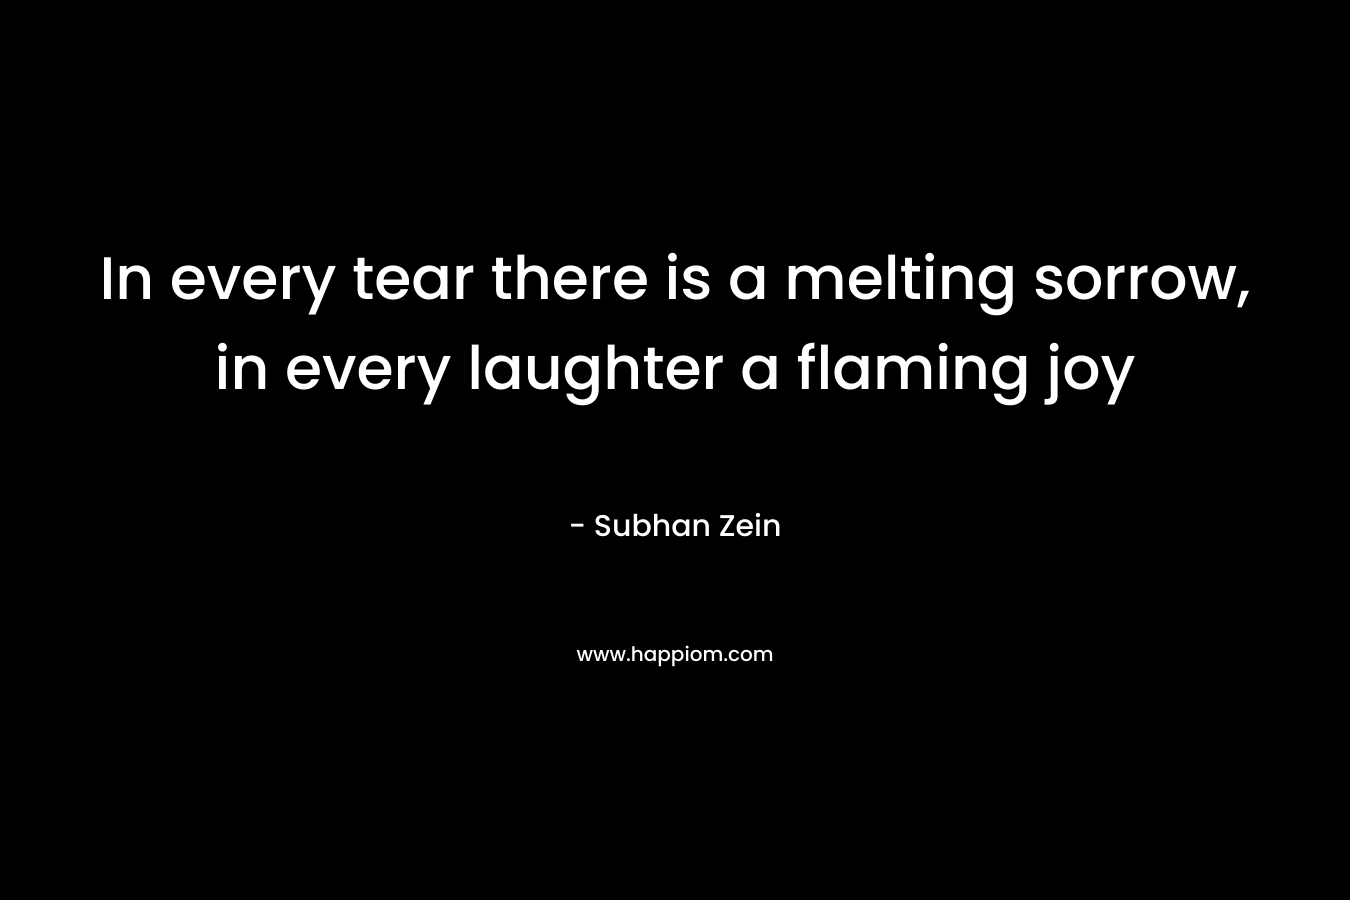 In every tear there is a melting sorrow, in every laughter a flaming joy – Subhan Zein